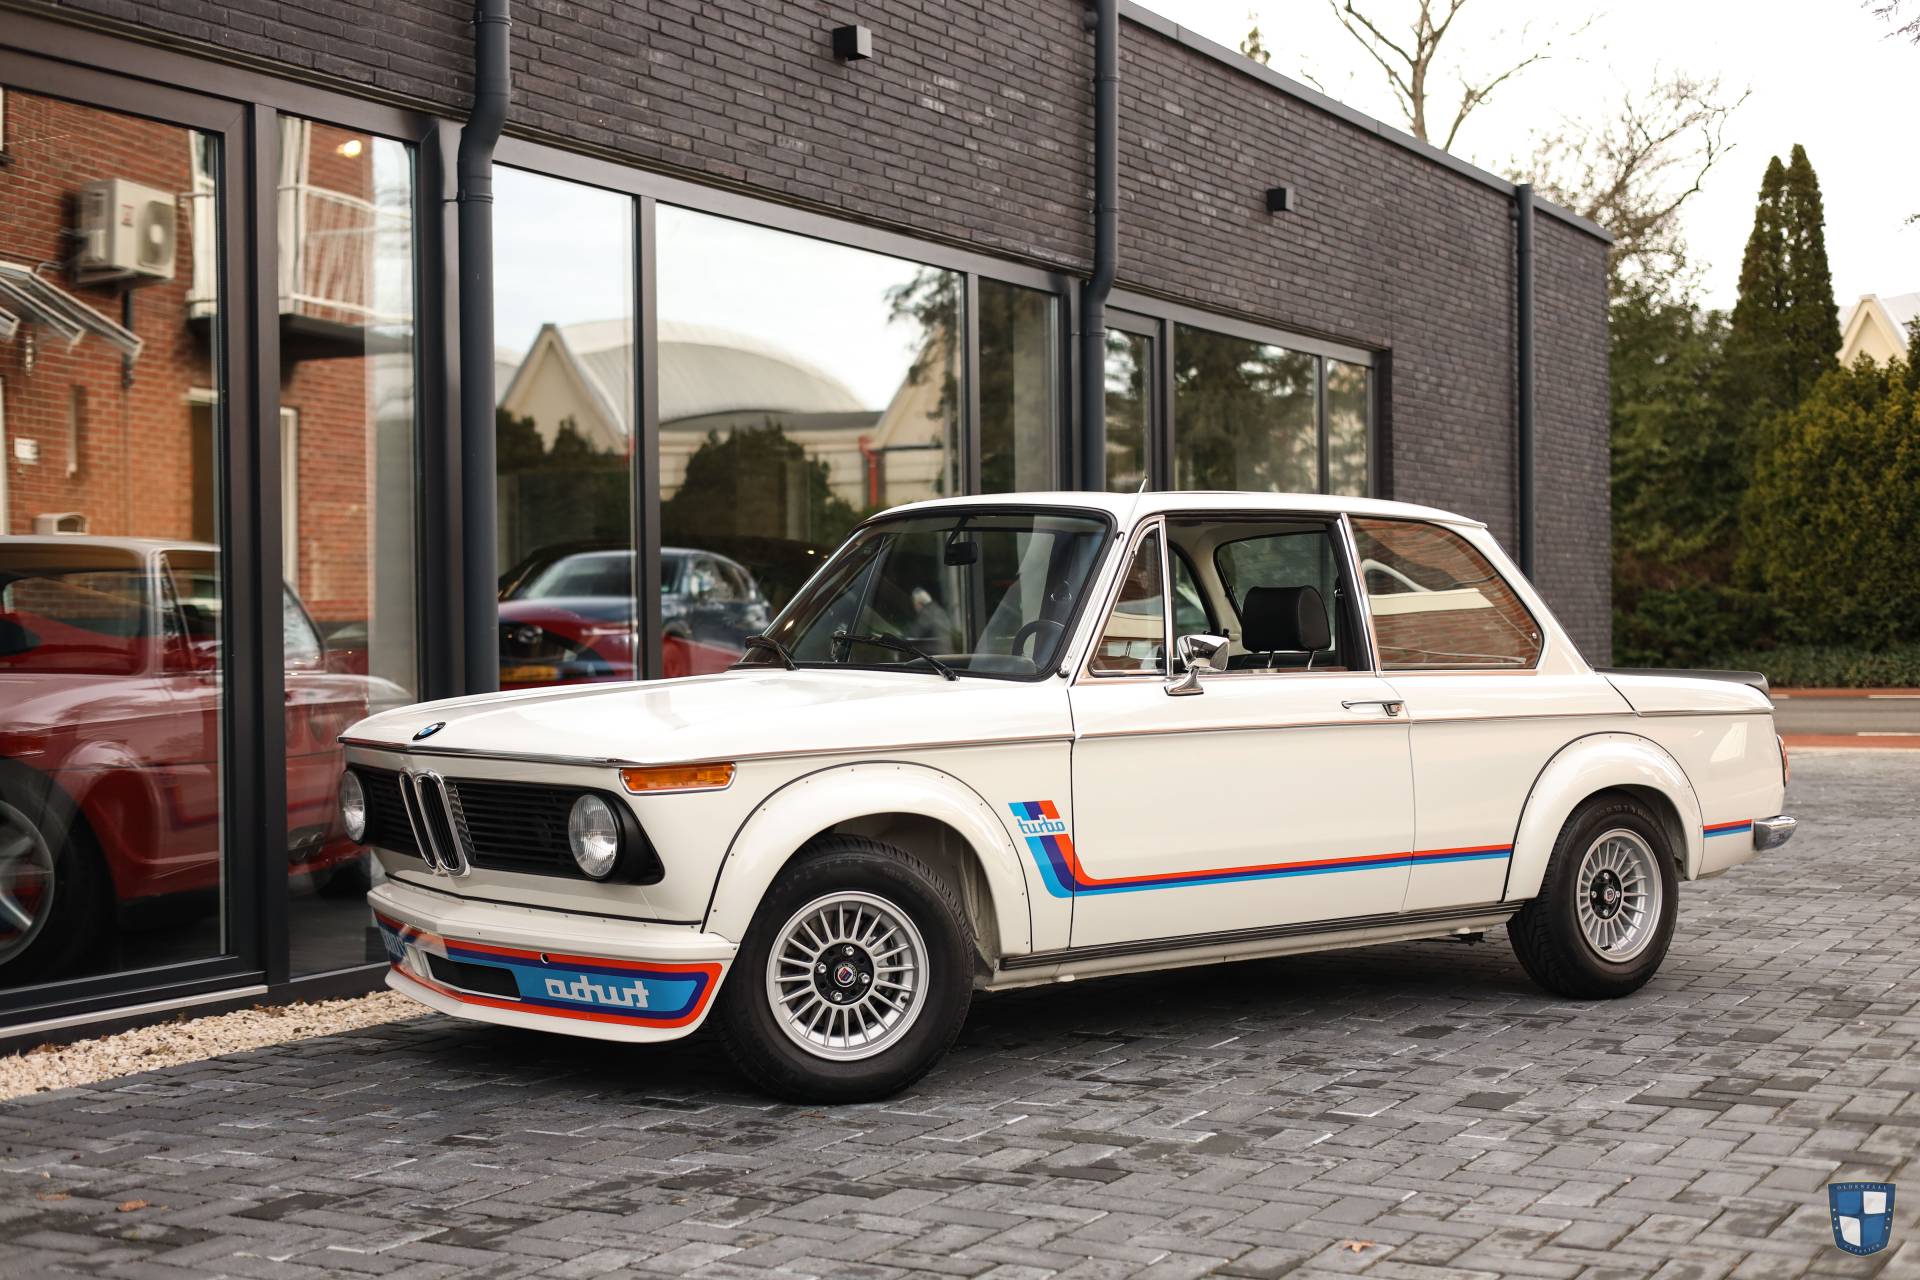 BMW 02 Series Classic Cars for Sale - Classic Trader